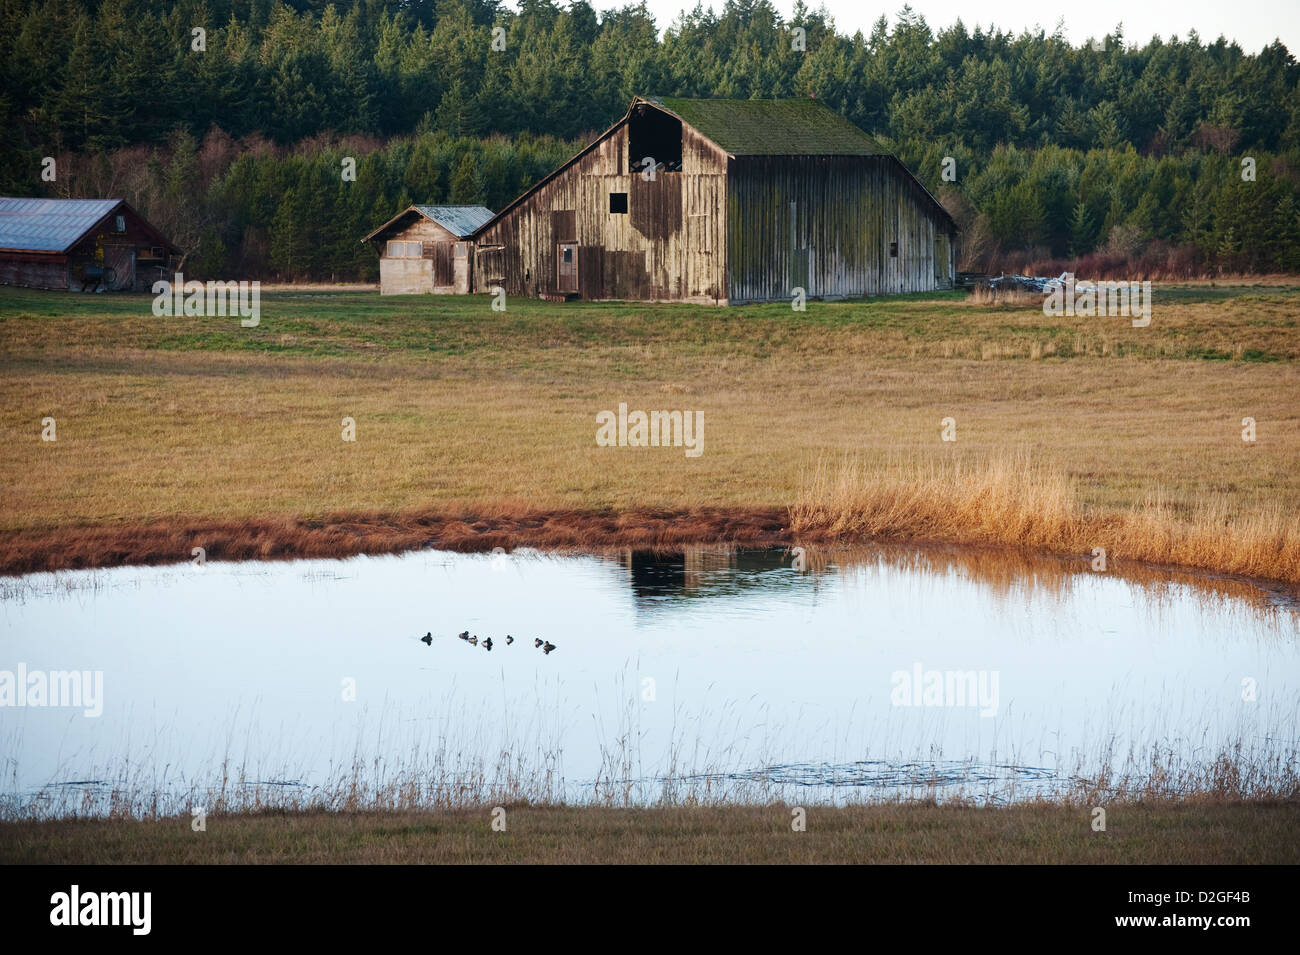 Ducks on the pond. An old wooden barn seen on San Juan Island in the Puget Sound area of Washington State. Stock Photo